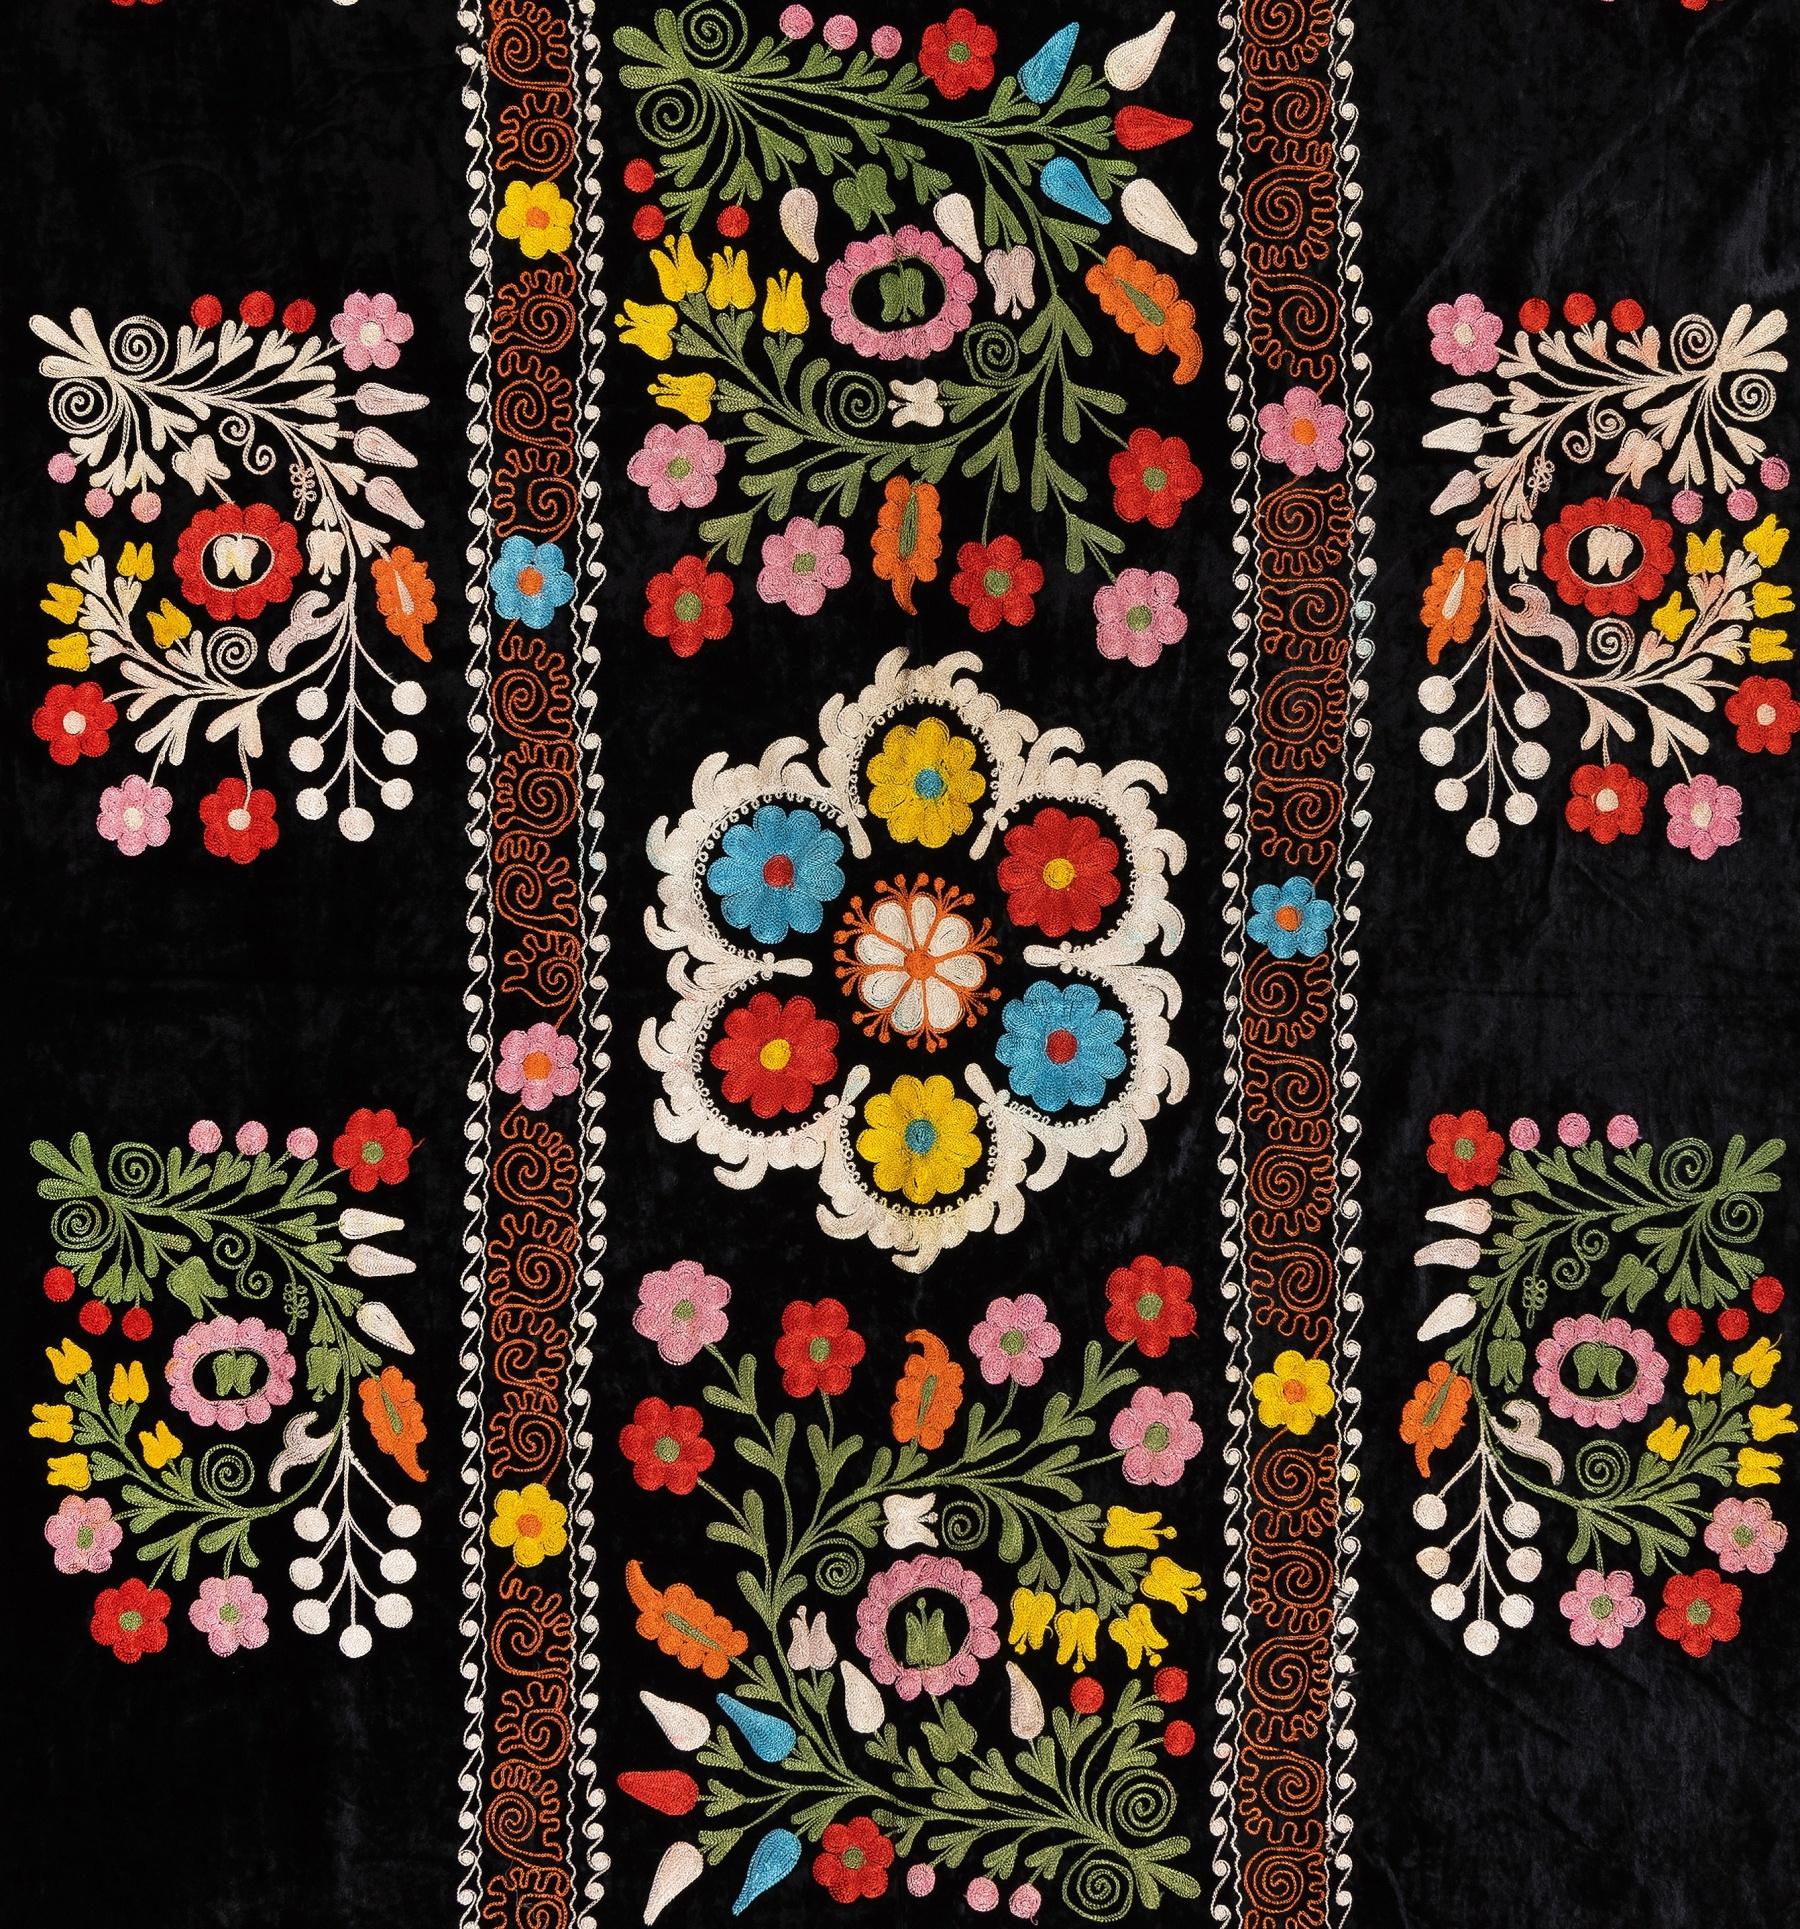 Uzbek 4.2x6.6 Ft Silk Embroidered Bed Cover, Black Tablecloth, Colorful Wall Hanging For Sale